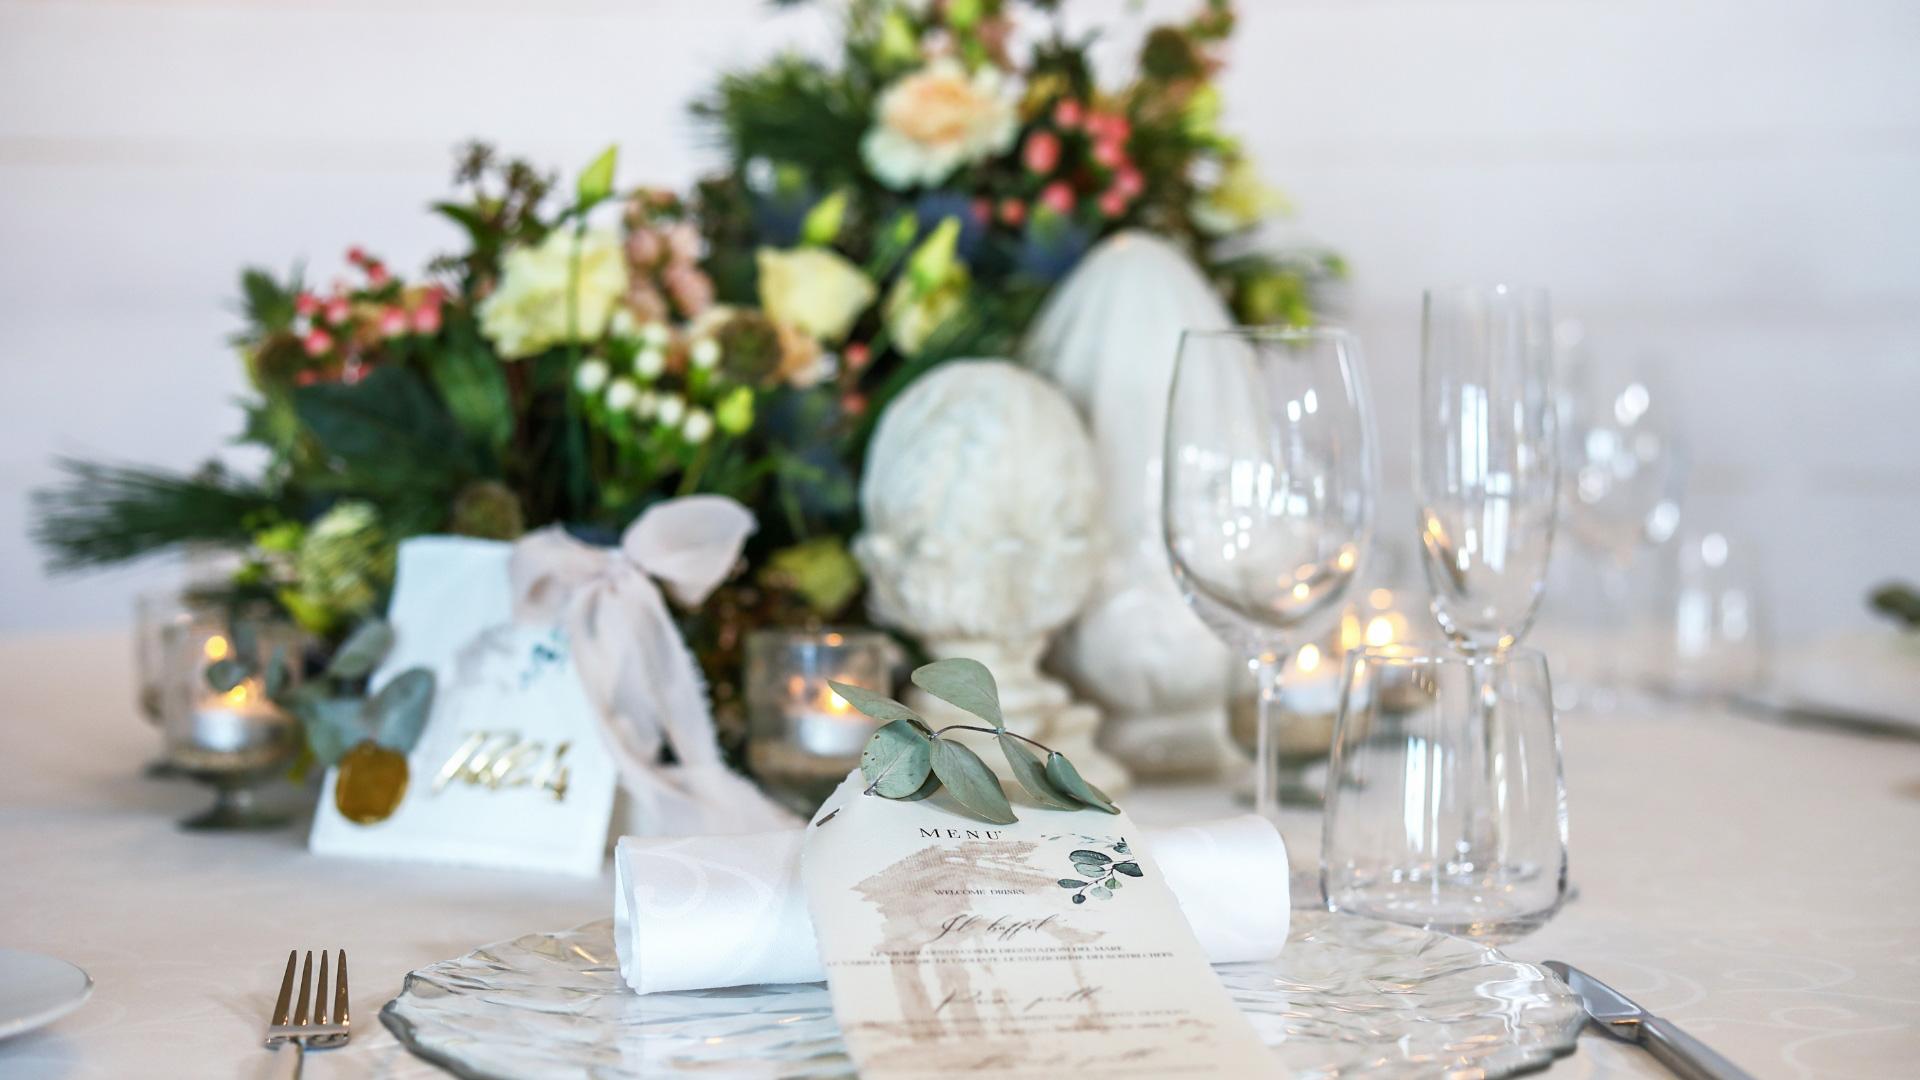 Elegant table with flowers, menu, and crystal glasses.